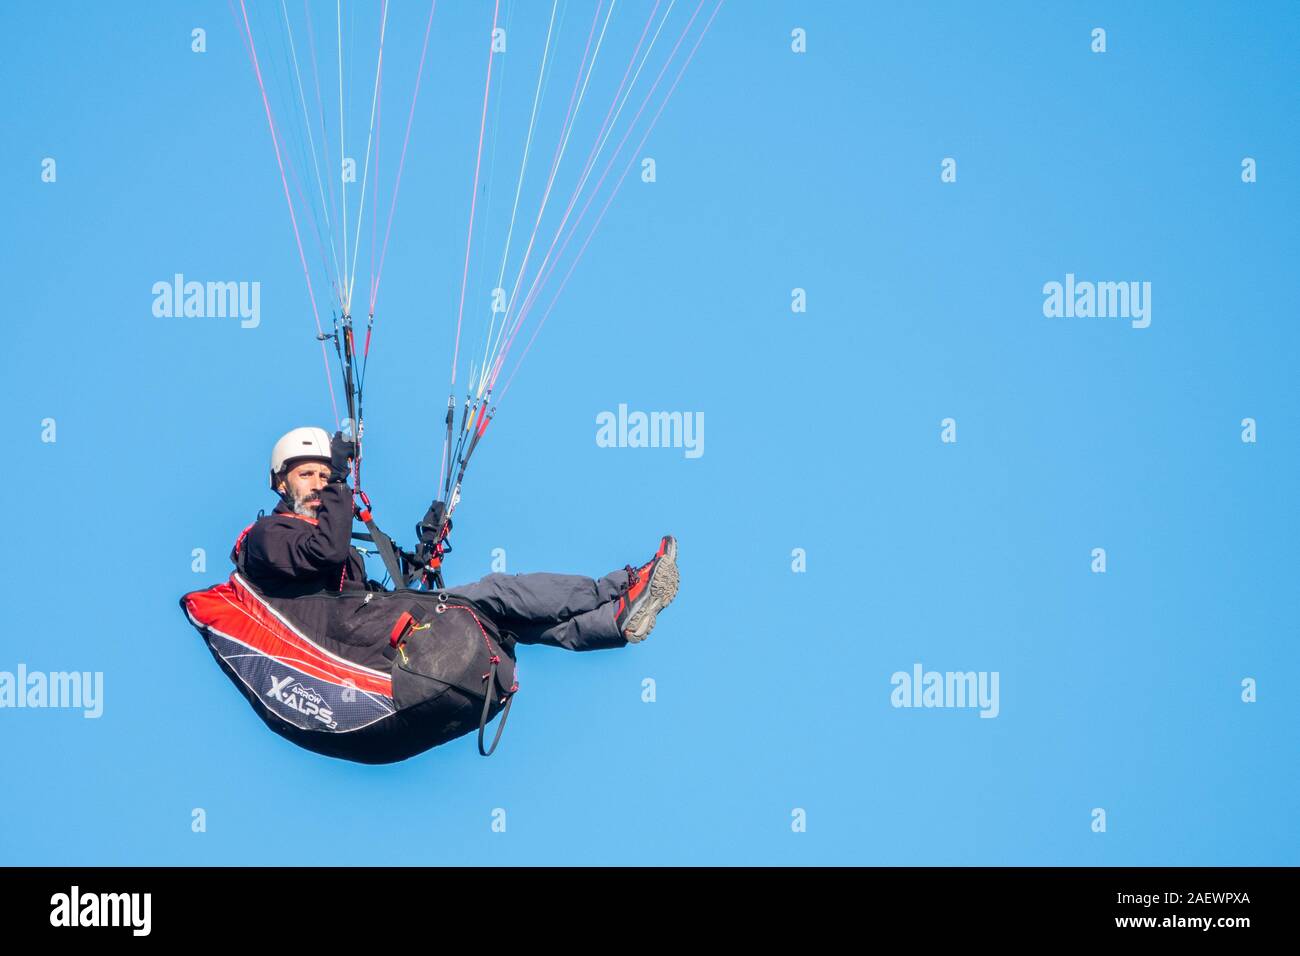 Bearded man seated in a paragliding rig in flight, full frame blue sky background, looking at camera with copy space Stock Photo